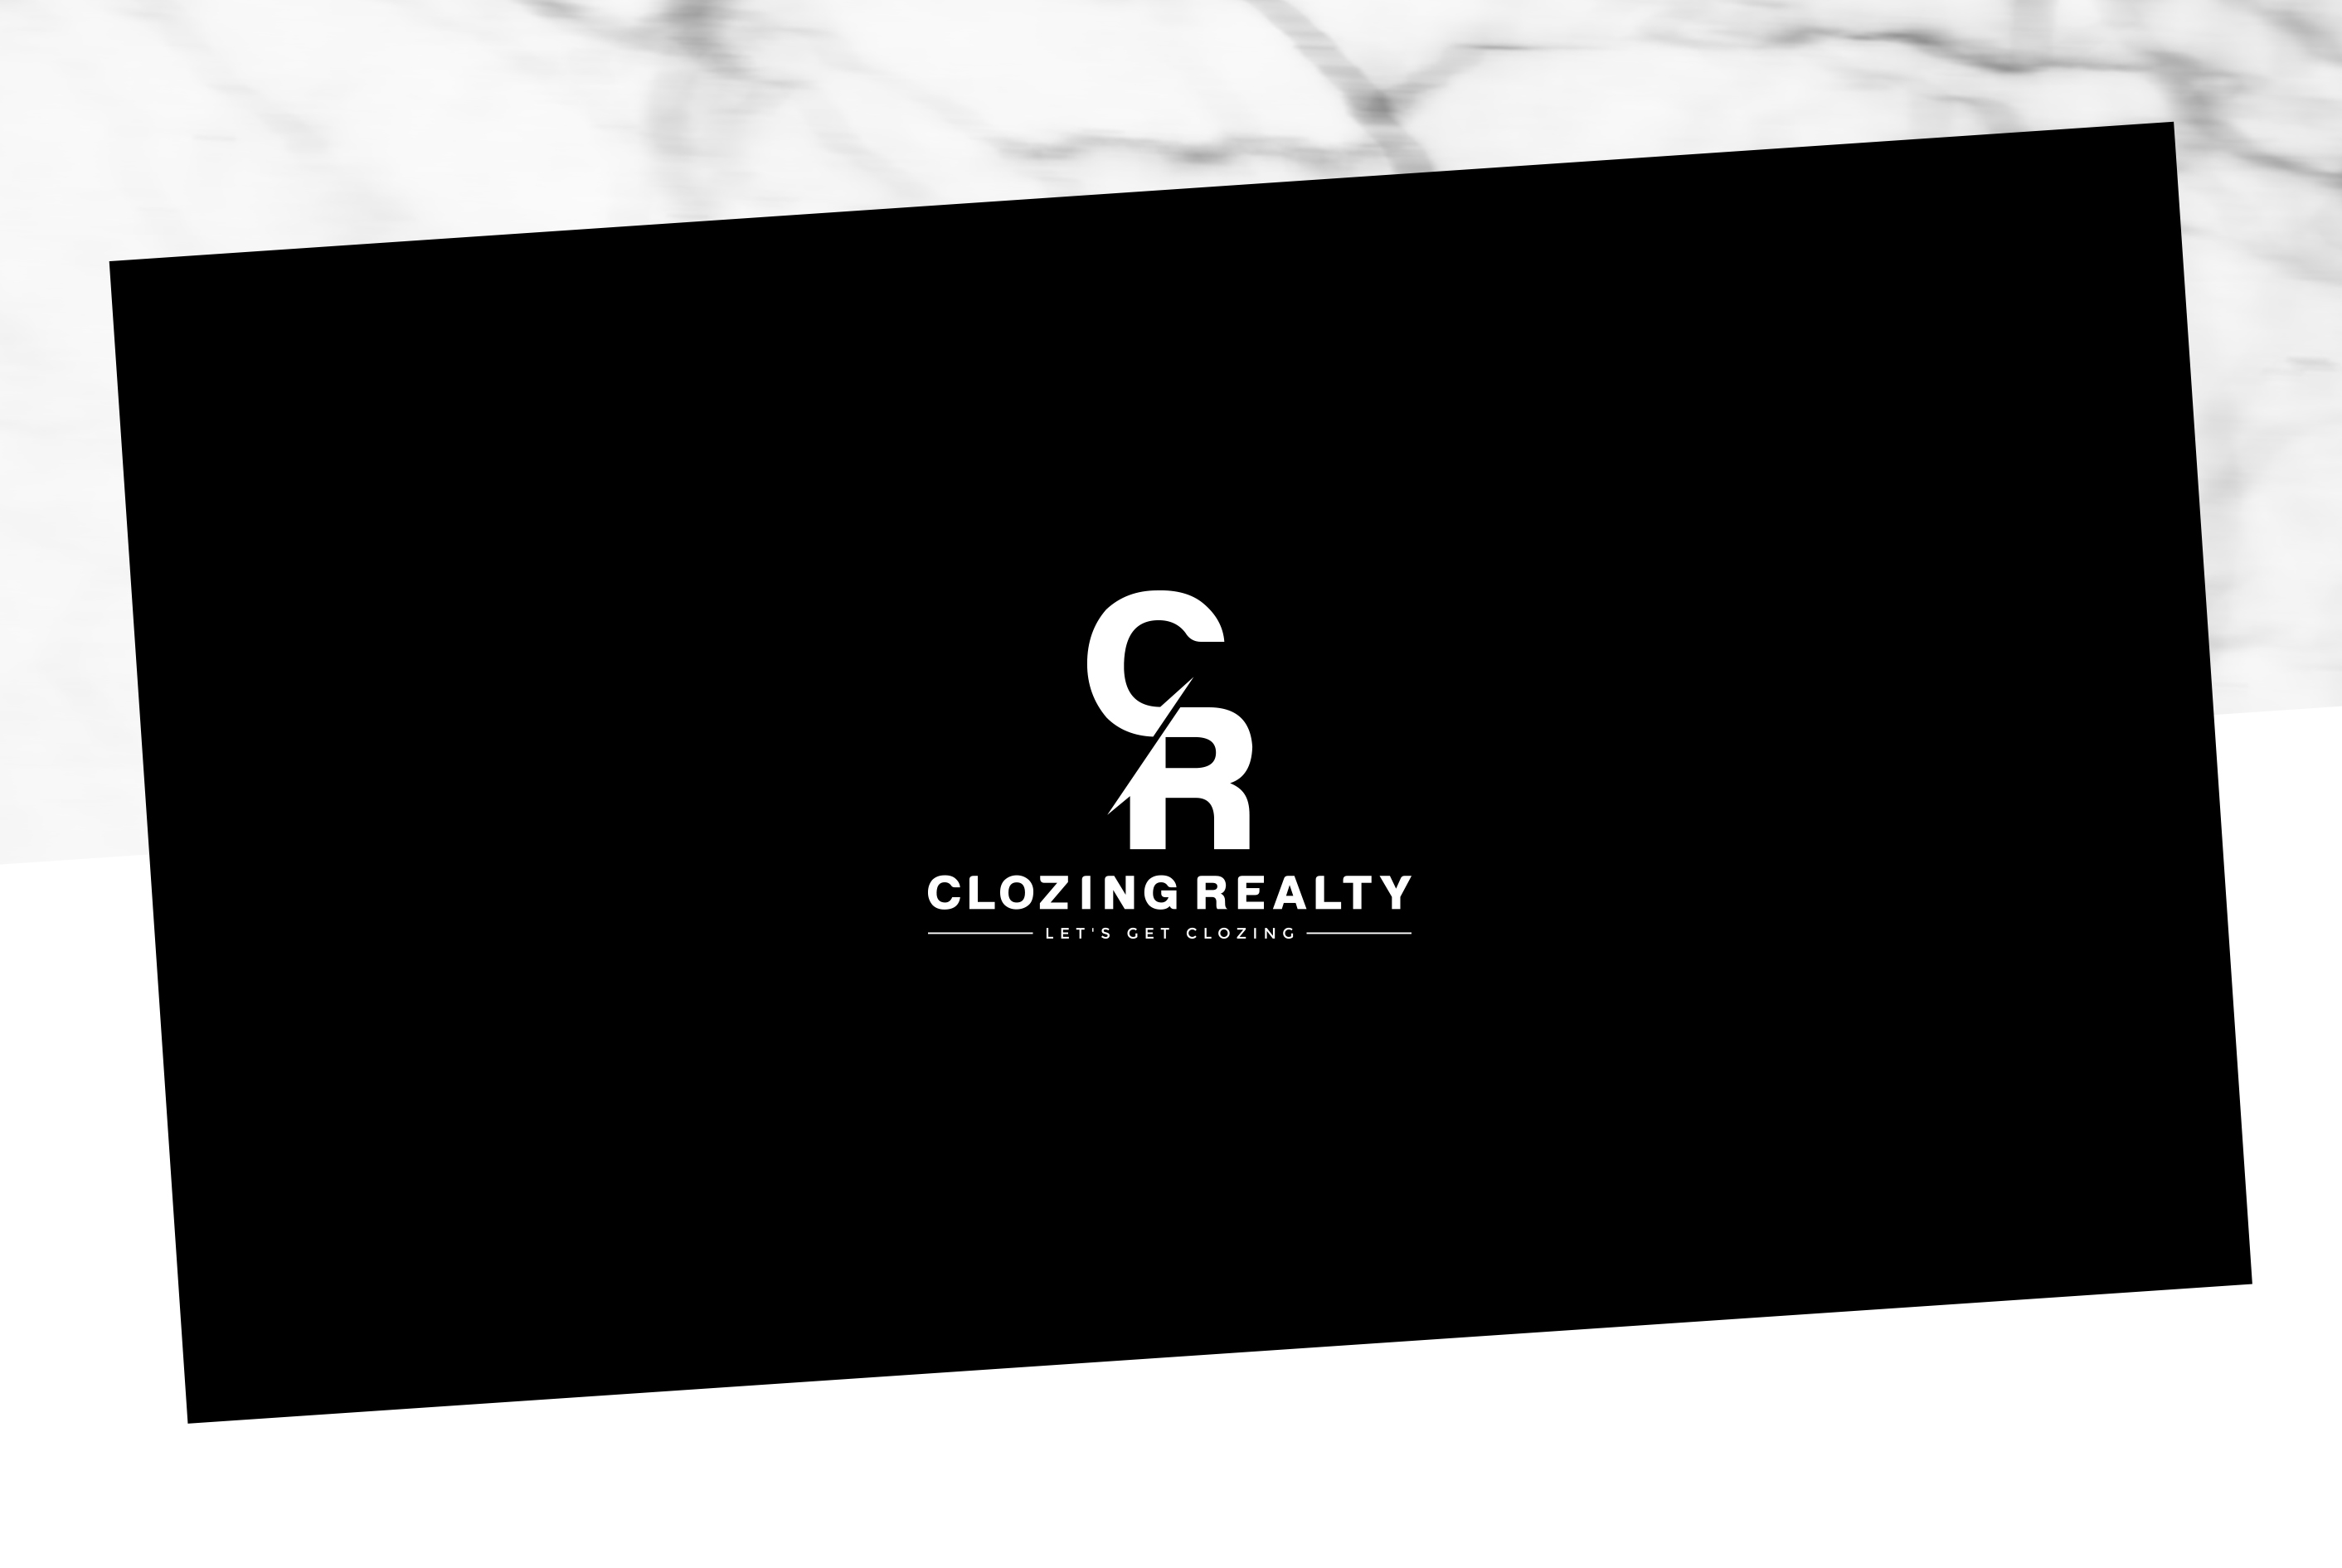 Clozing Realty Group Design #5